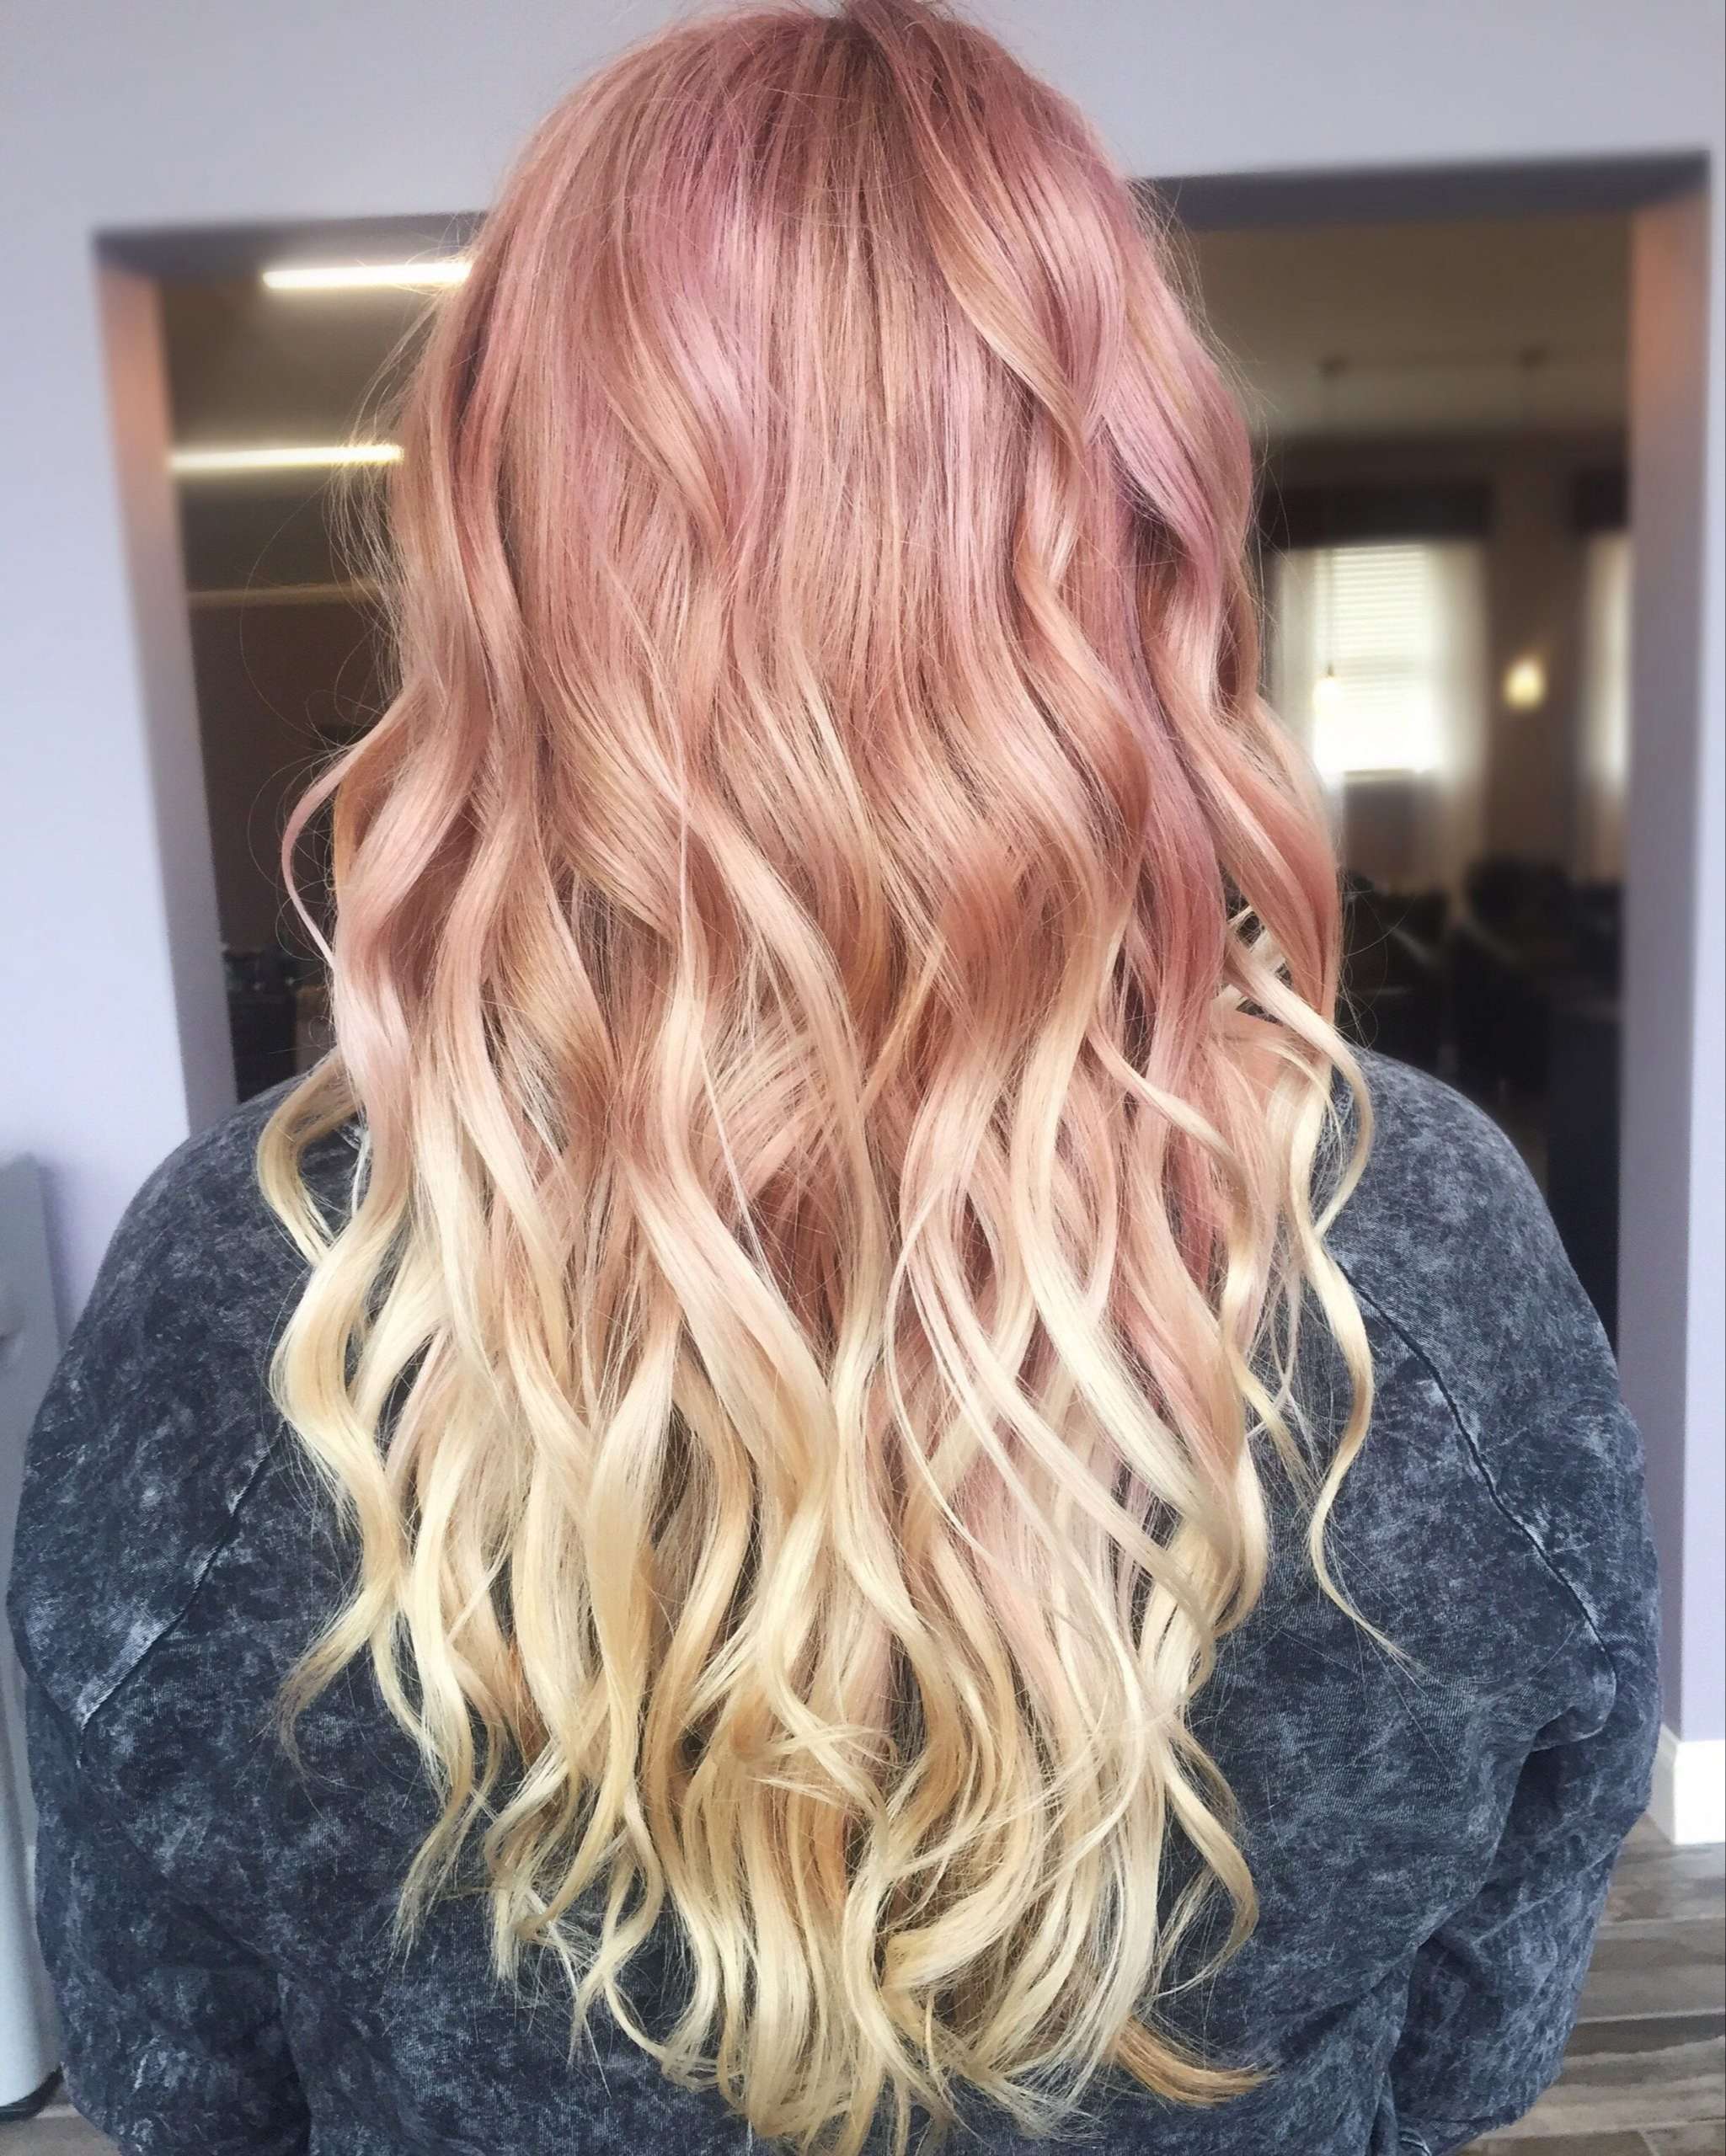 Blonde rose gold ombre